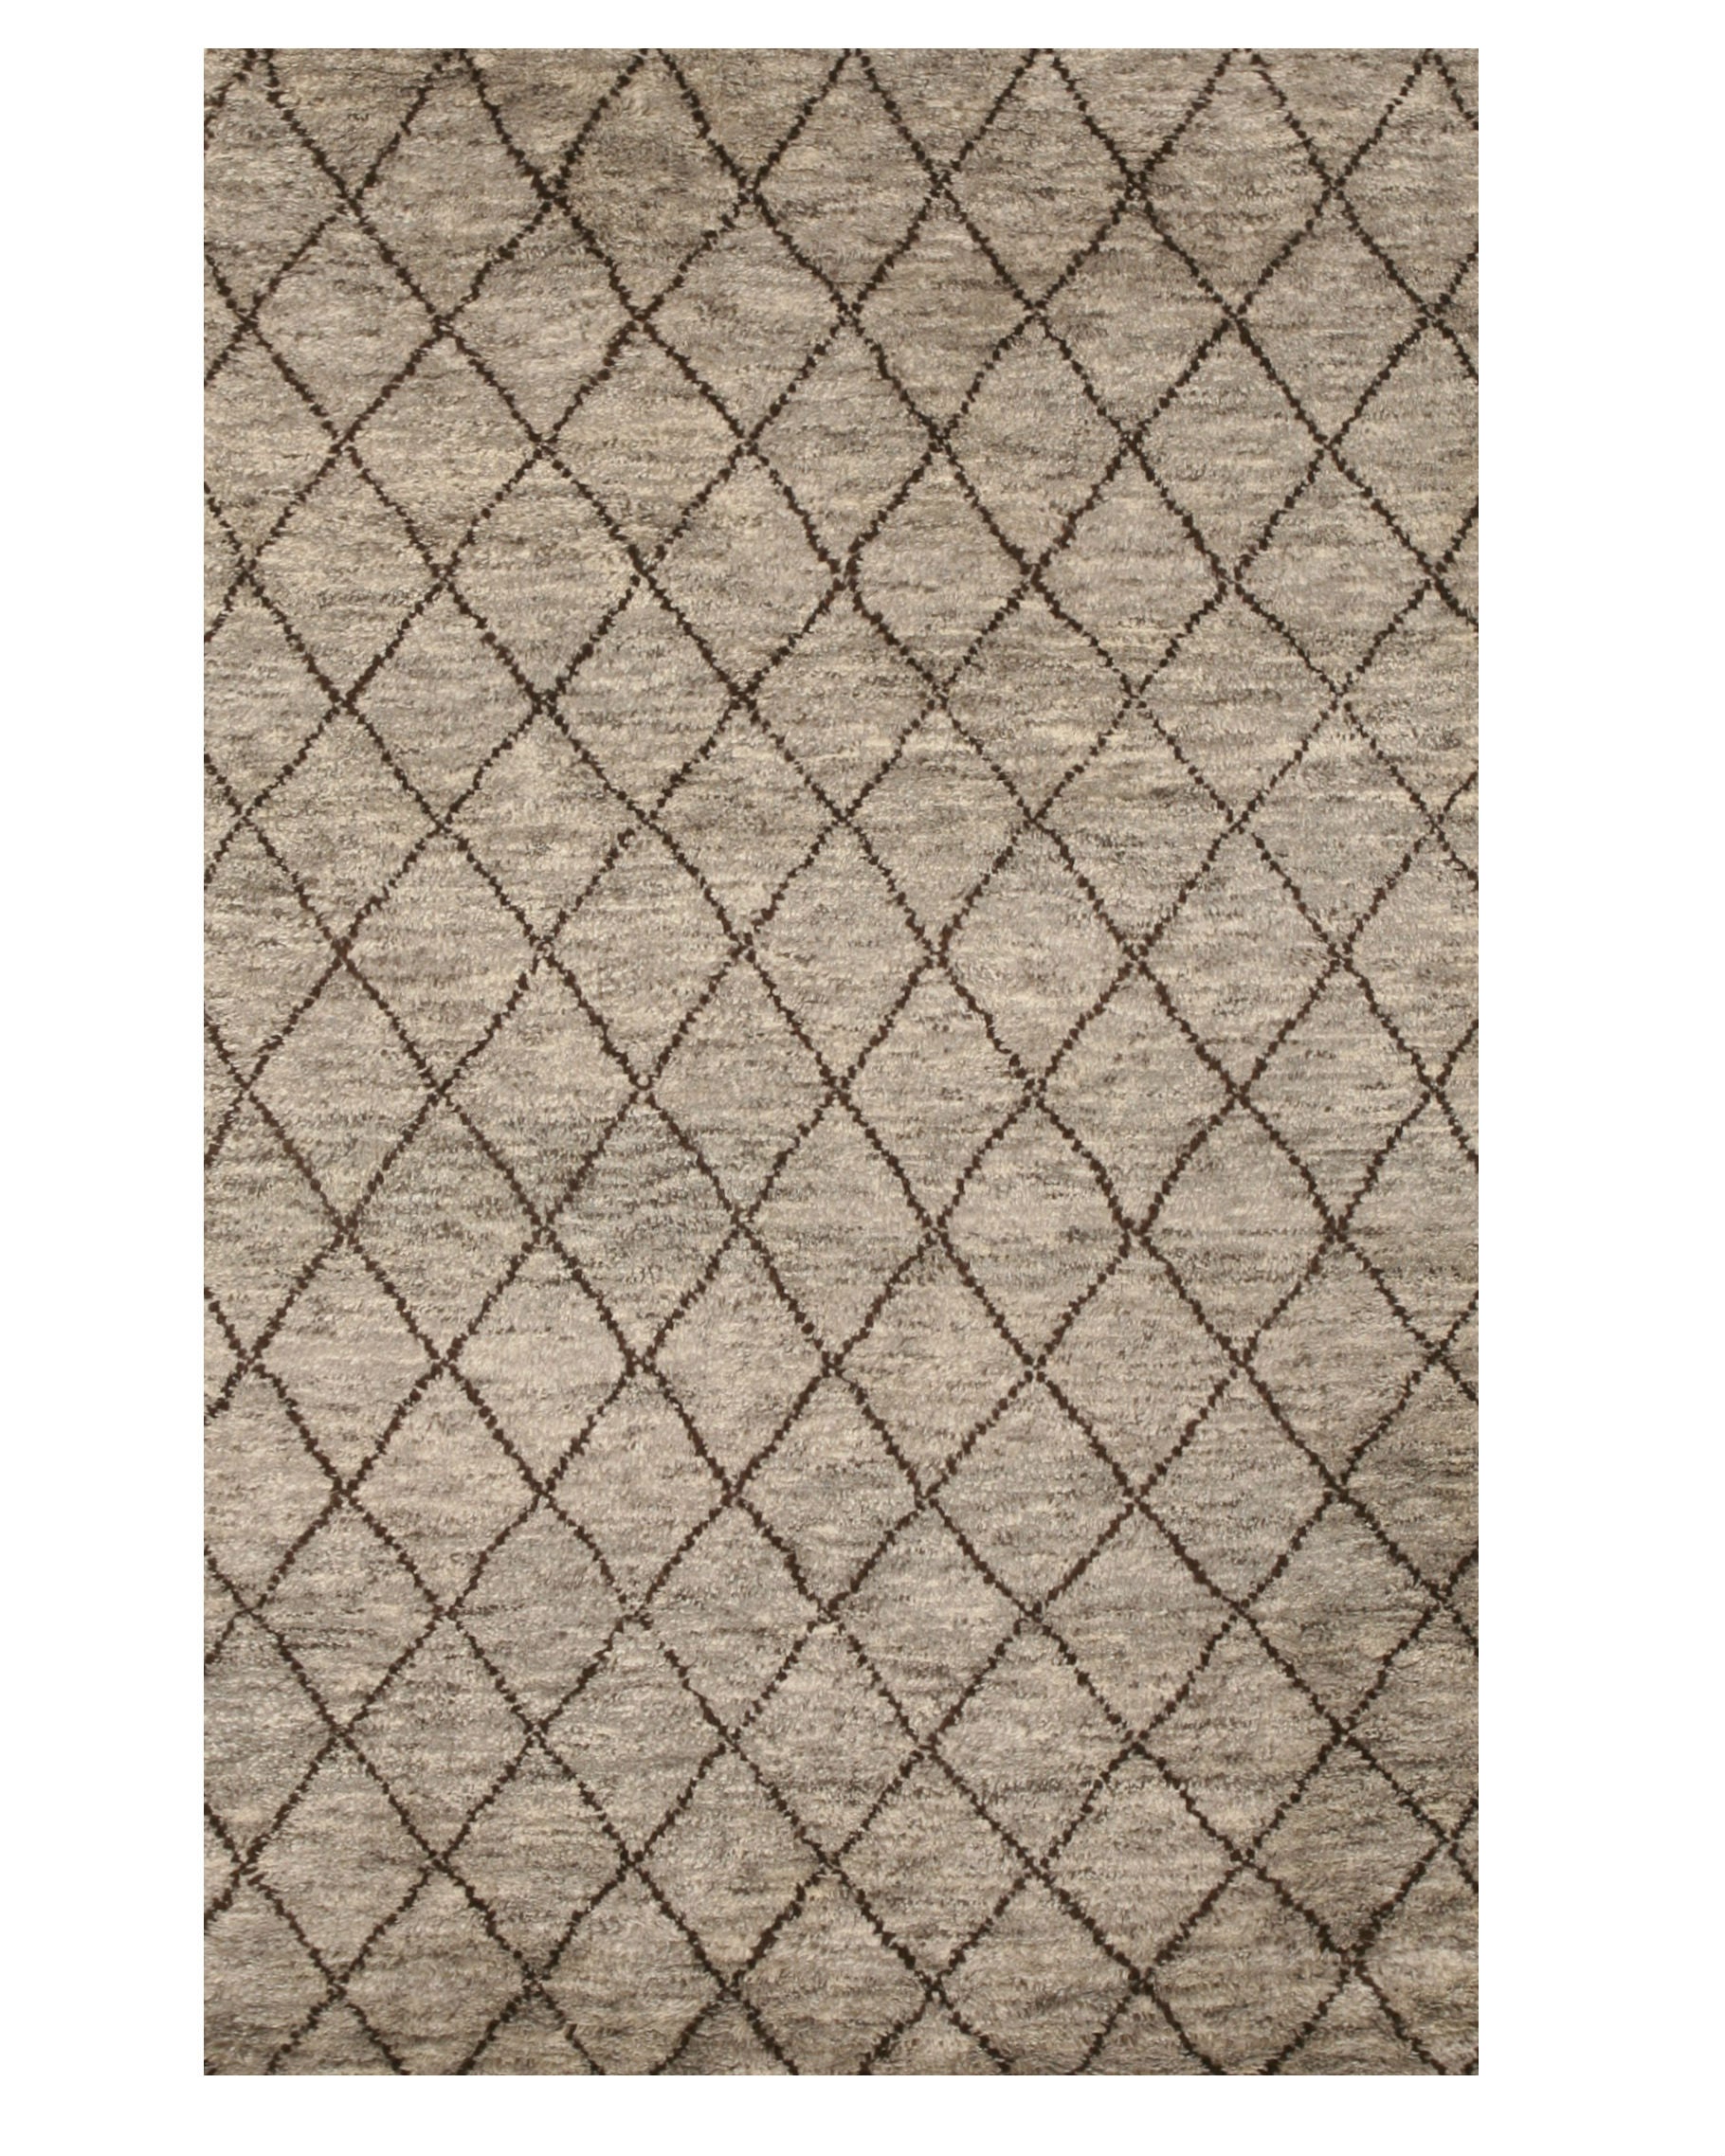 EORC Hand-knotted Wool Gray Transitional Trellis Moroccan Rug